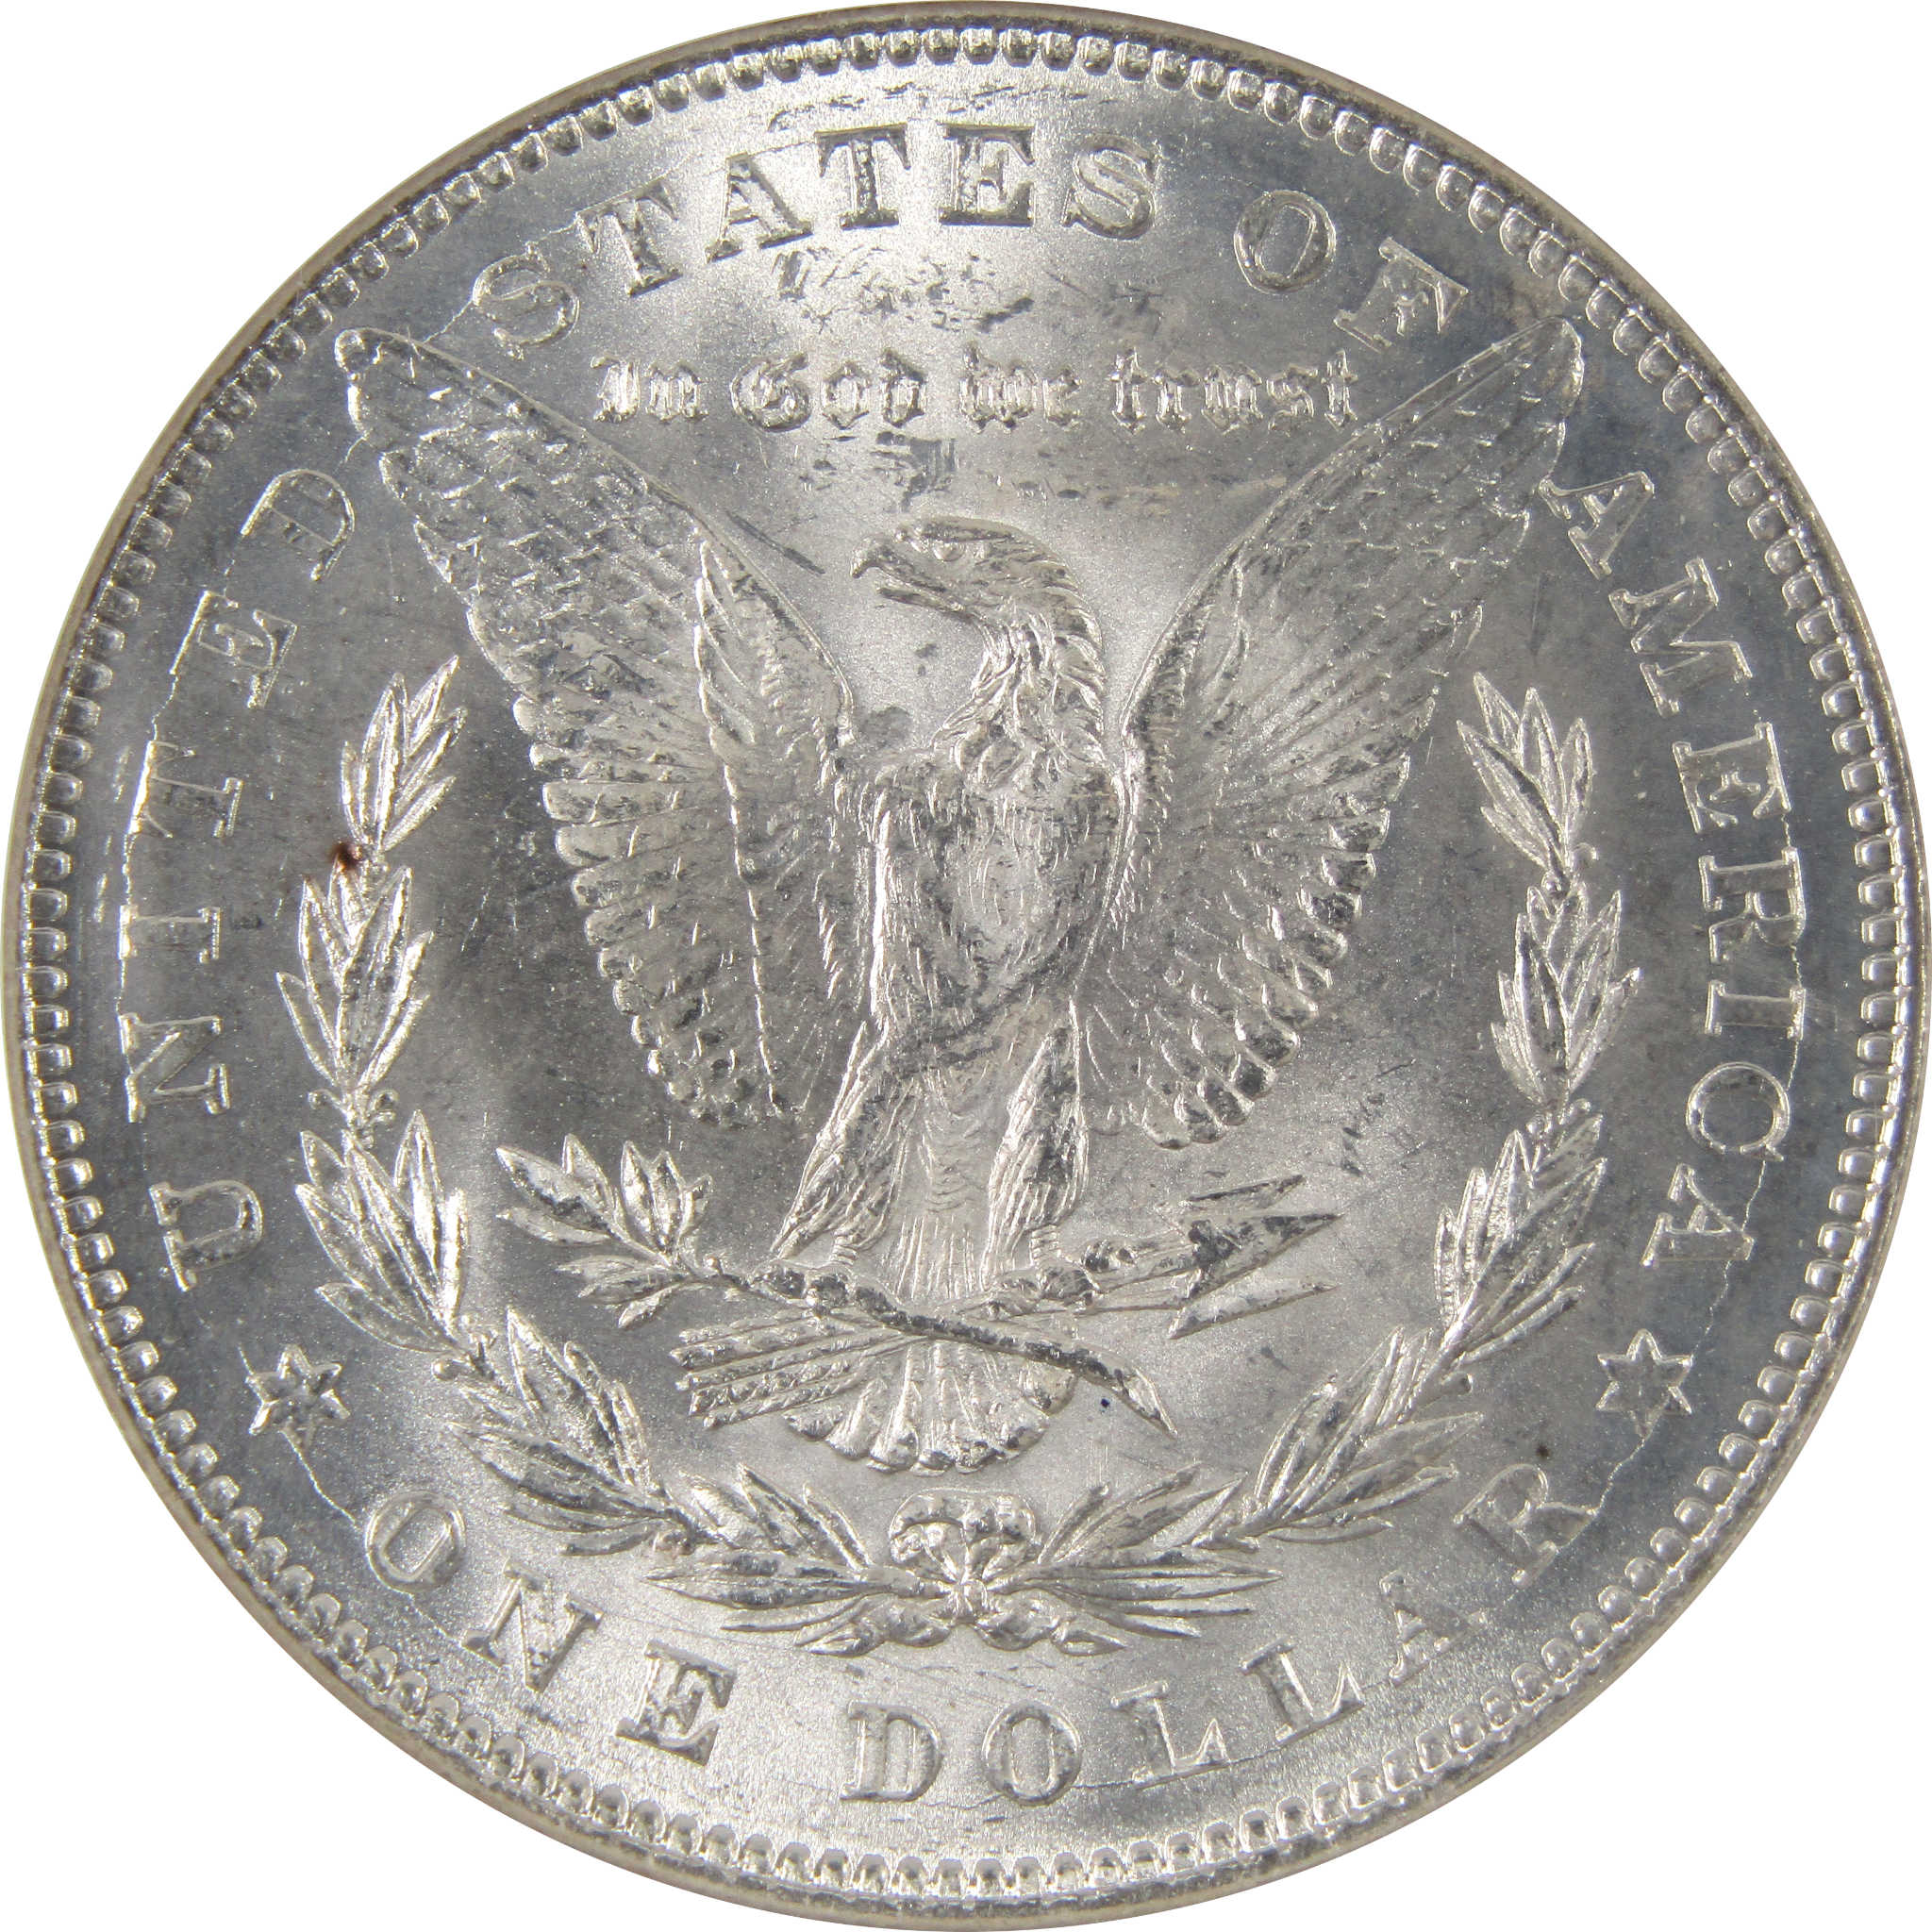 1878 7/8TF Morgan Dollar MS 64 NGC 90% Silver Uncirculated SKU:I7439 - Morgan coin - Morgan silver dollar - Morgan silver dollar for sale - Profile Coins &amp; Collectibles